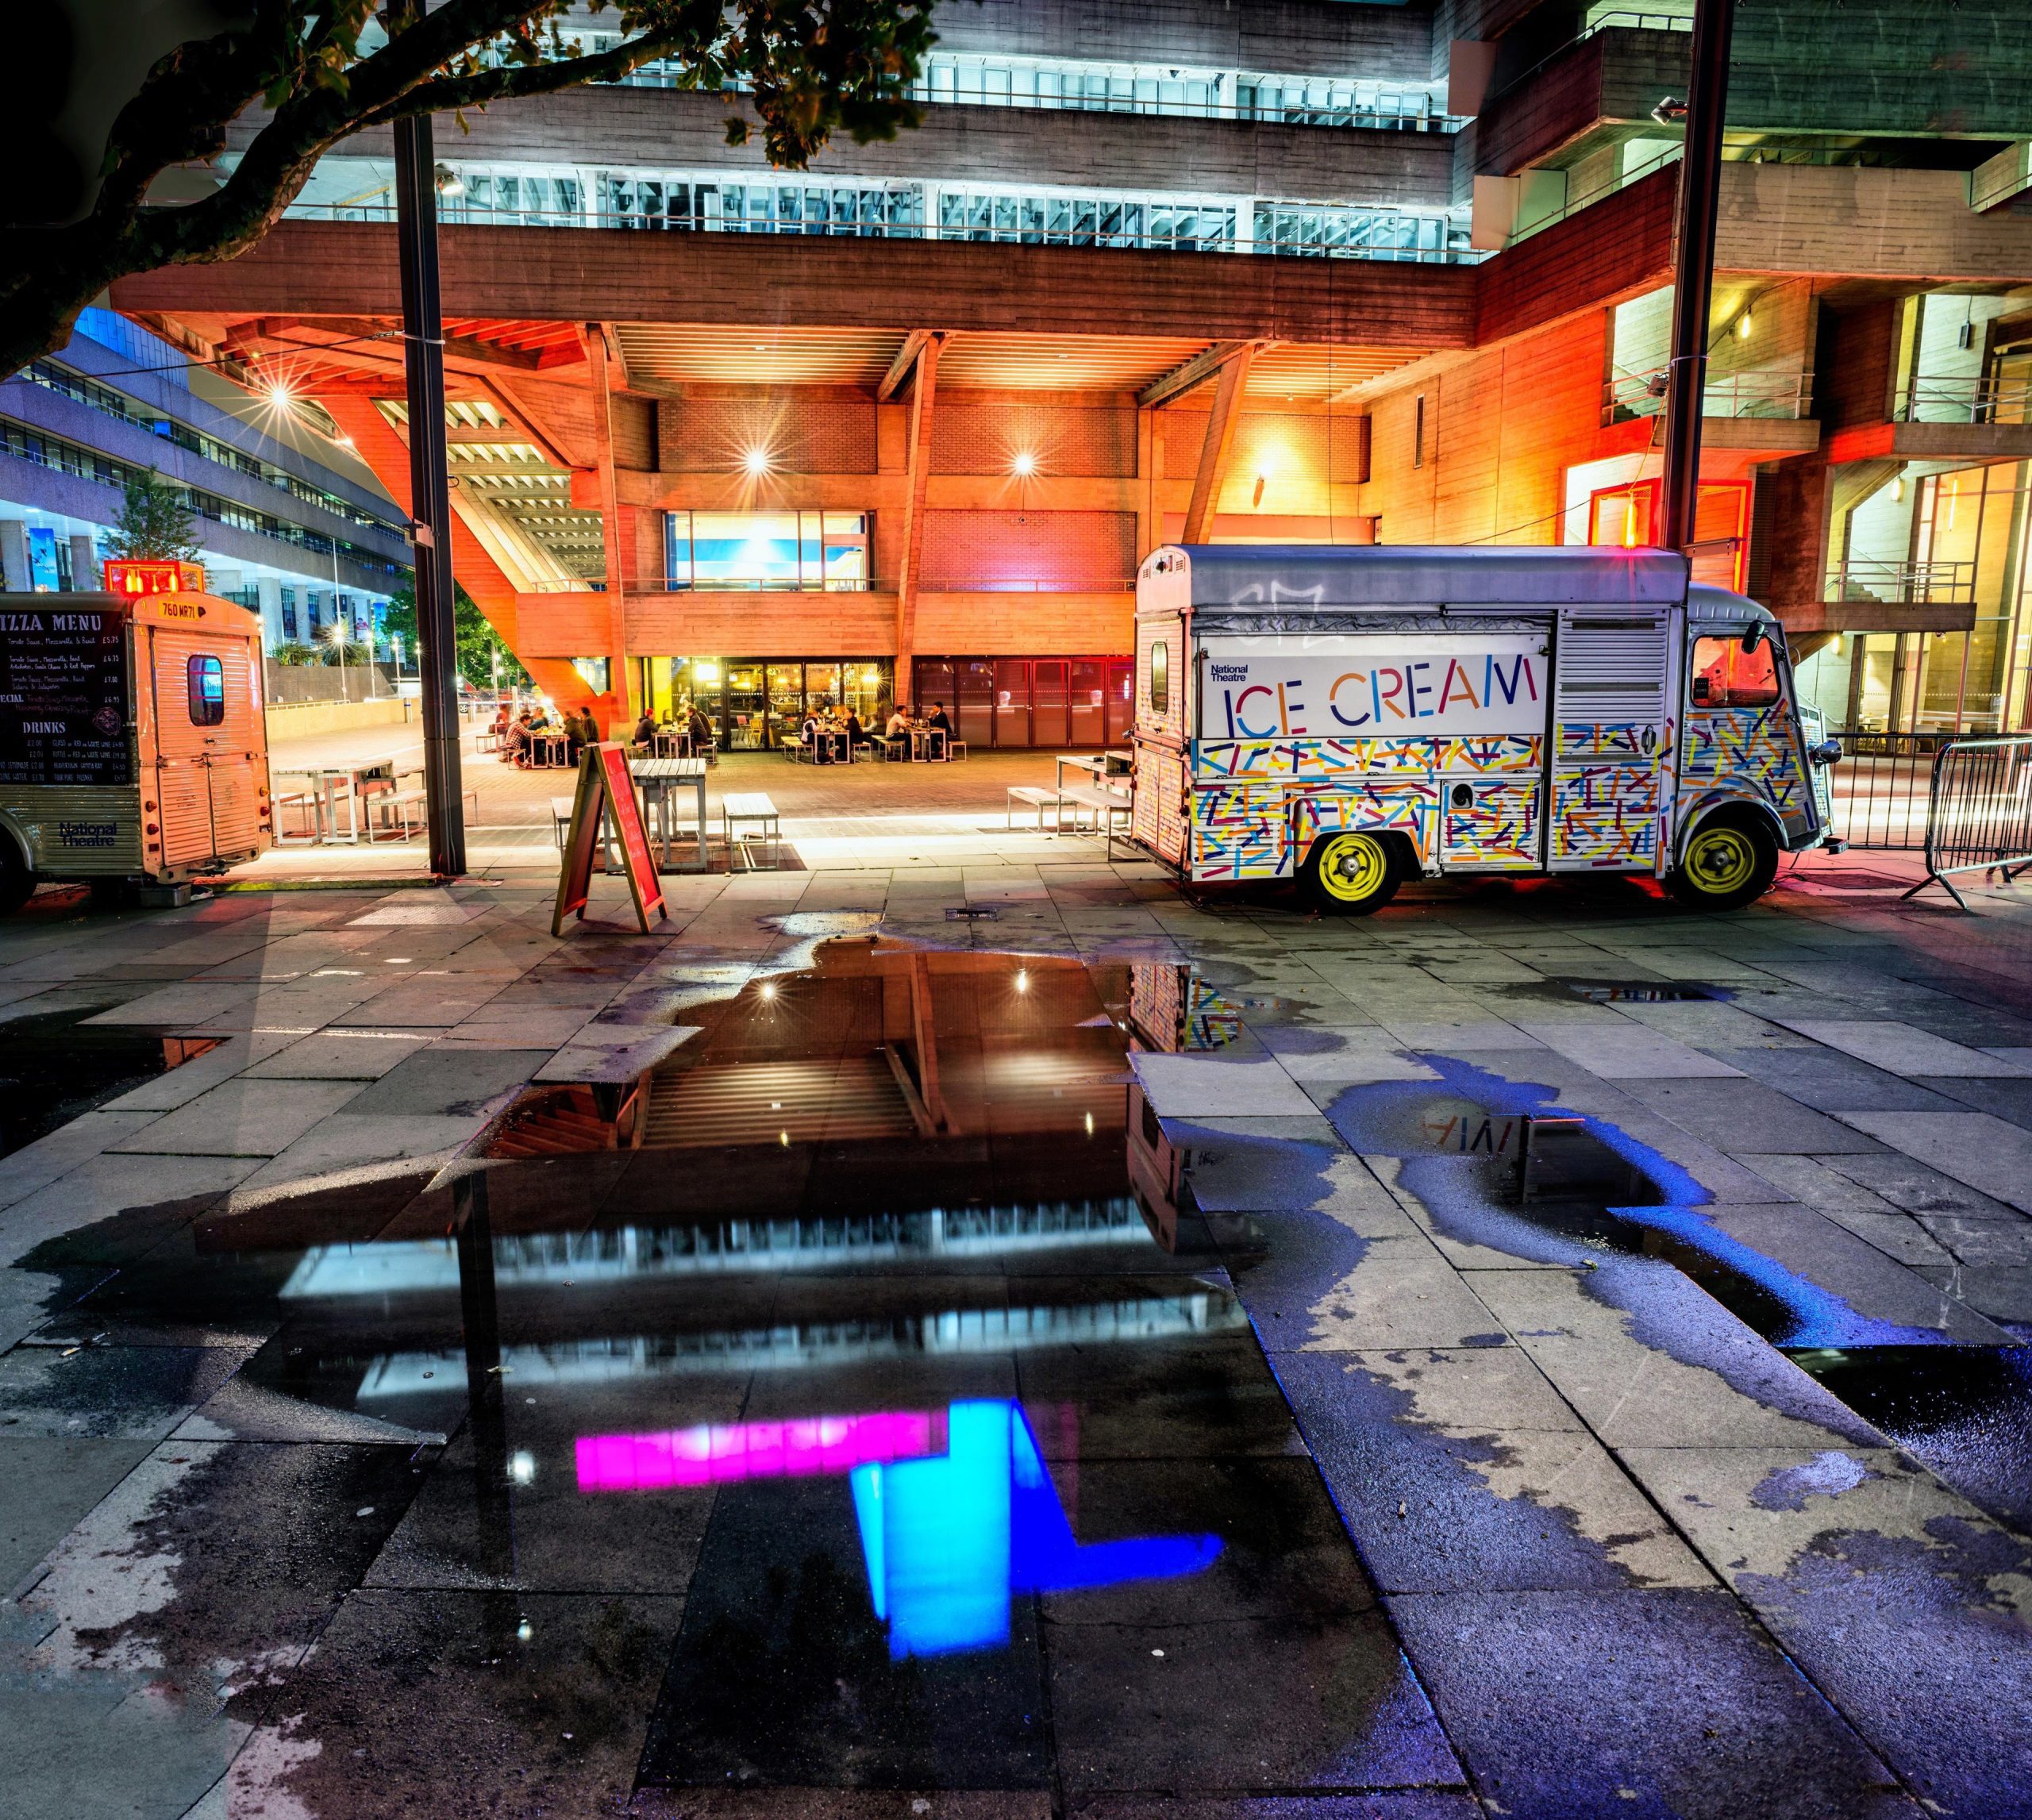 A captivating night street shot of the National Theatre exterior architecture in London, featuring vibrant neon lights reflected in puddles. An ice cream van adds a touch of urban charm to the foreground against the backdrop of the iconic brutalist architecture.